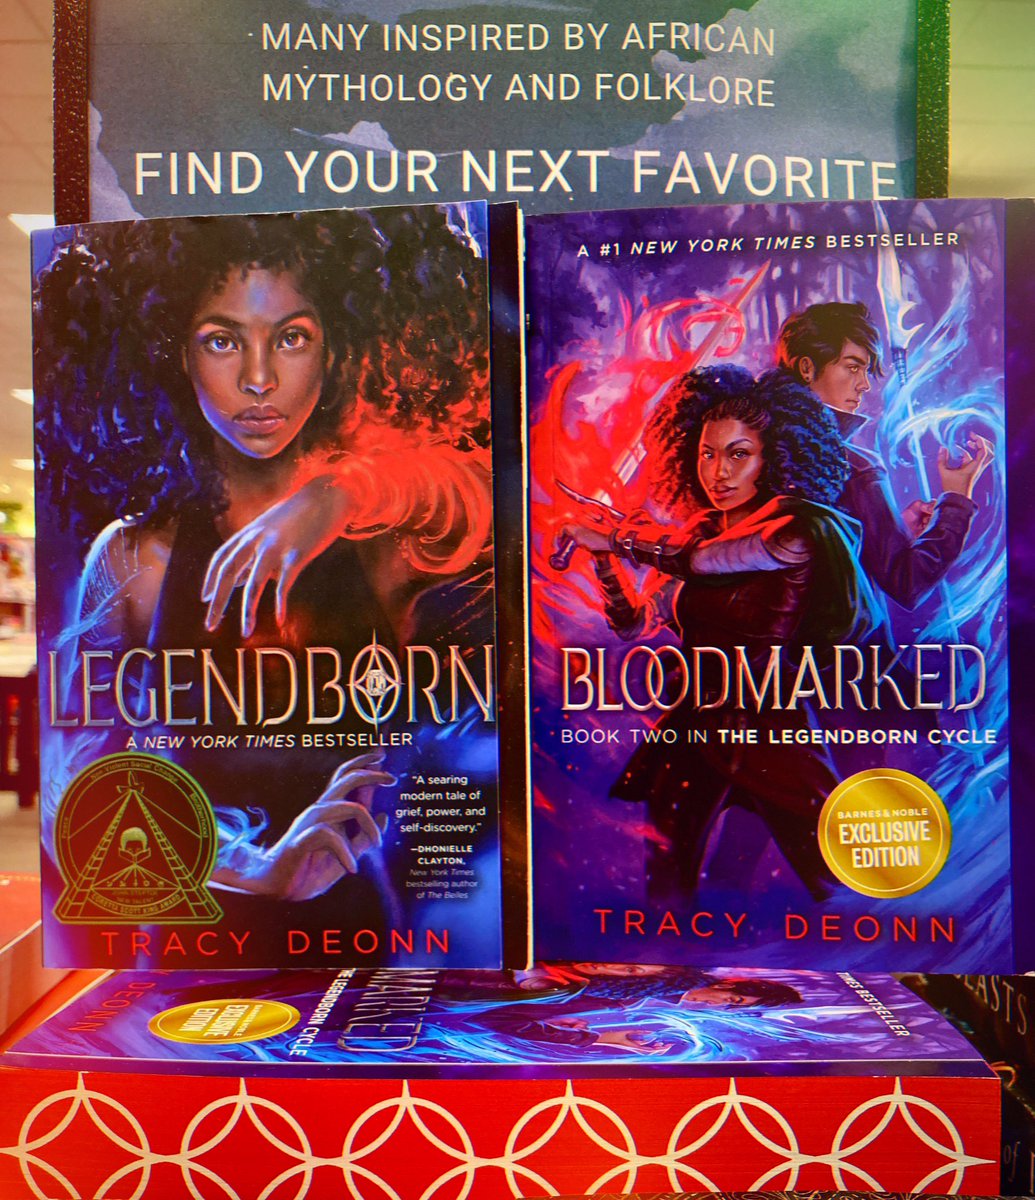 “Two faults. My race and my gender. But they are not faults. They are strength. And I am more than this man can comprehend.” - Legendborn by Tracy Deonn #blackvoices #blackfantasybooks #fantasy #blackhistorymonth #scifi #youngadultbooks #barnesandnoblemacon #barnesandnoble #bn